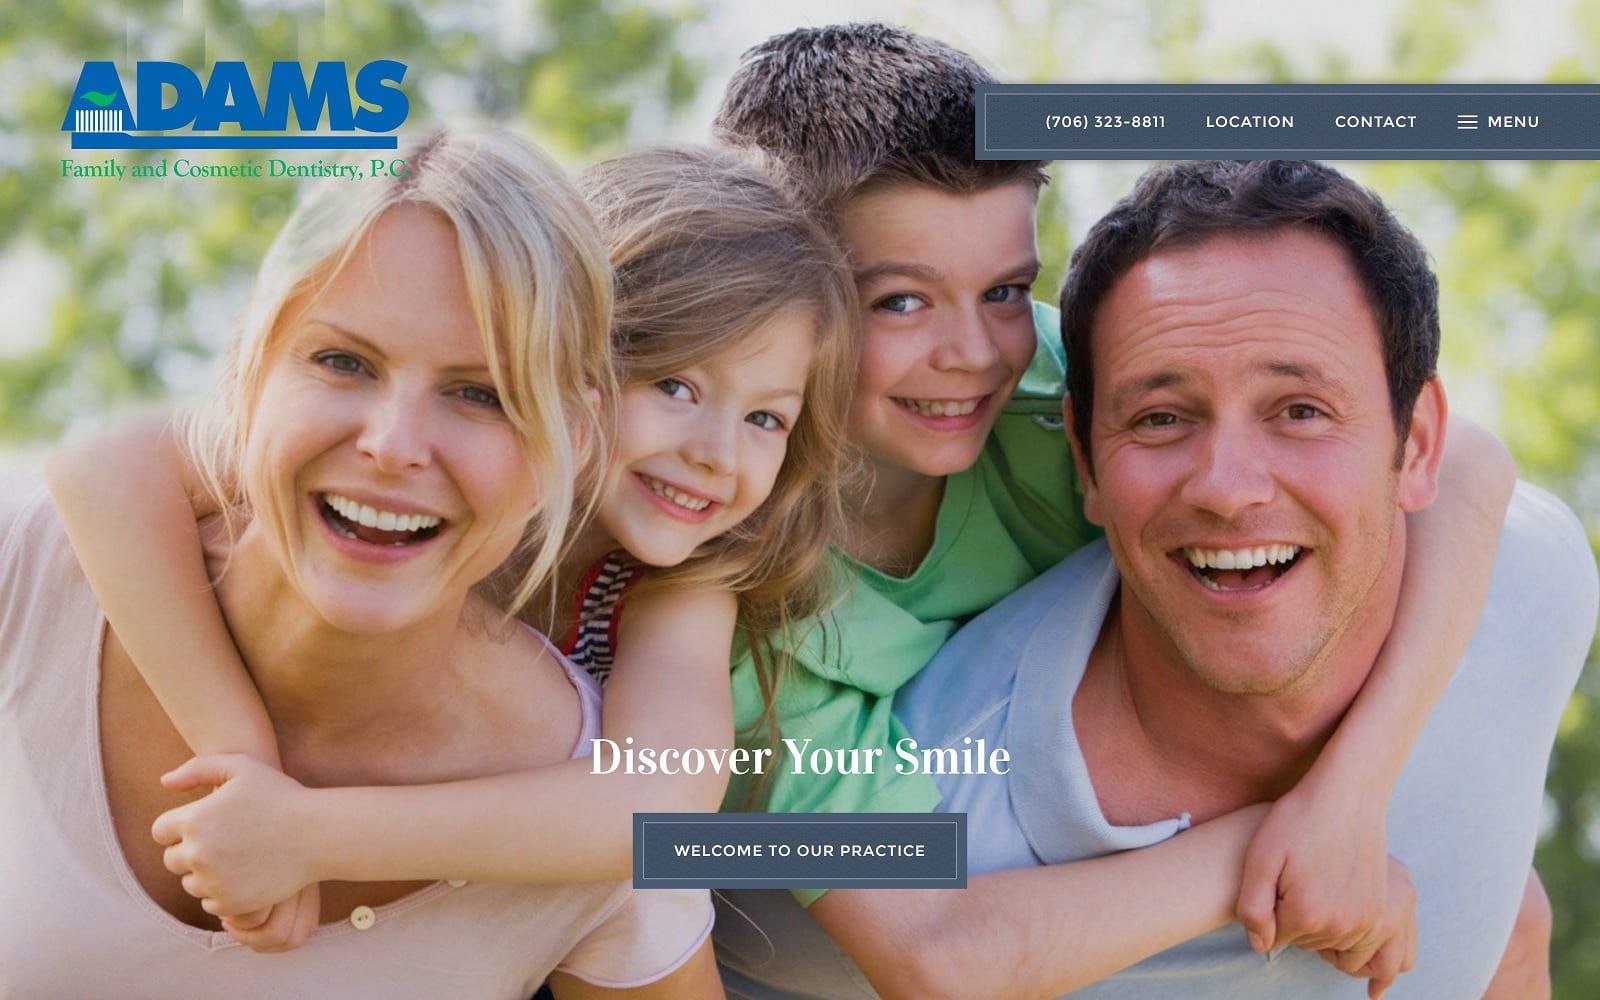 The screenshot of adams family and cosmetic dentistry pc dmd adamsdmd. Com website